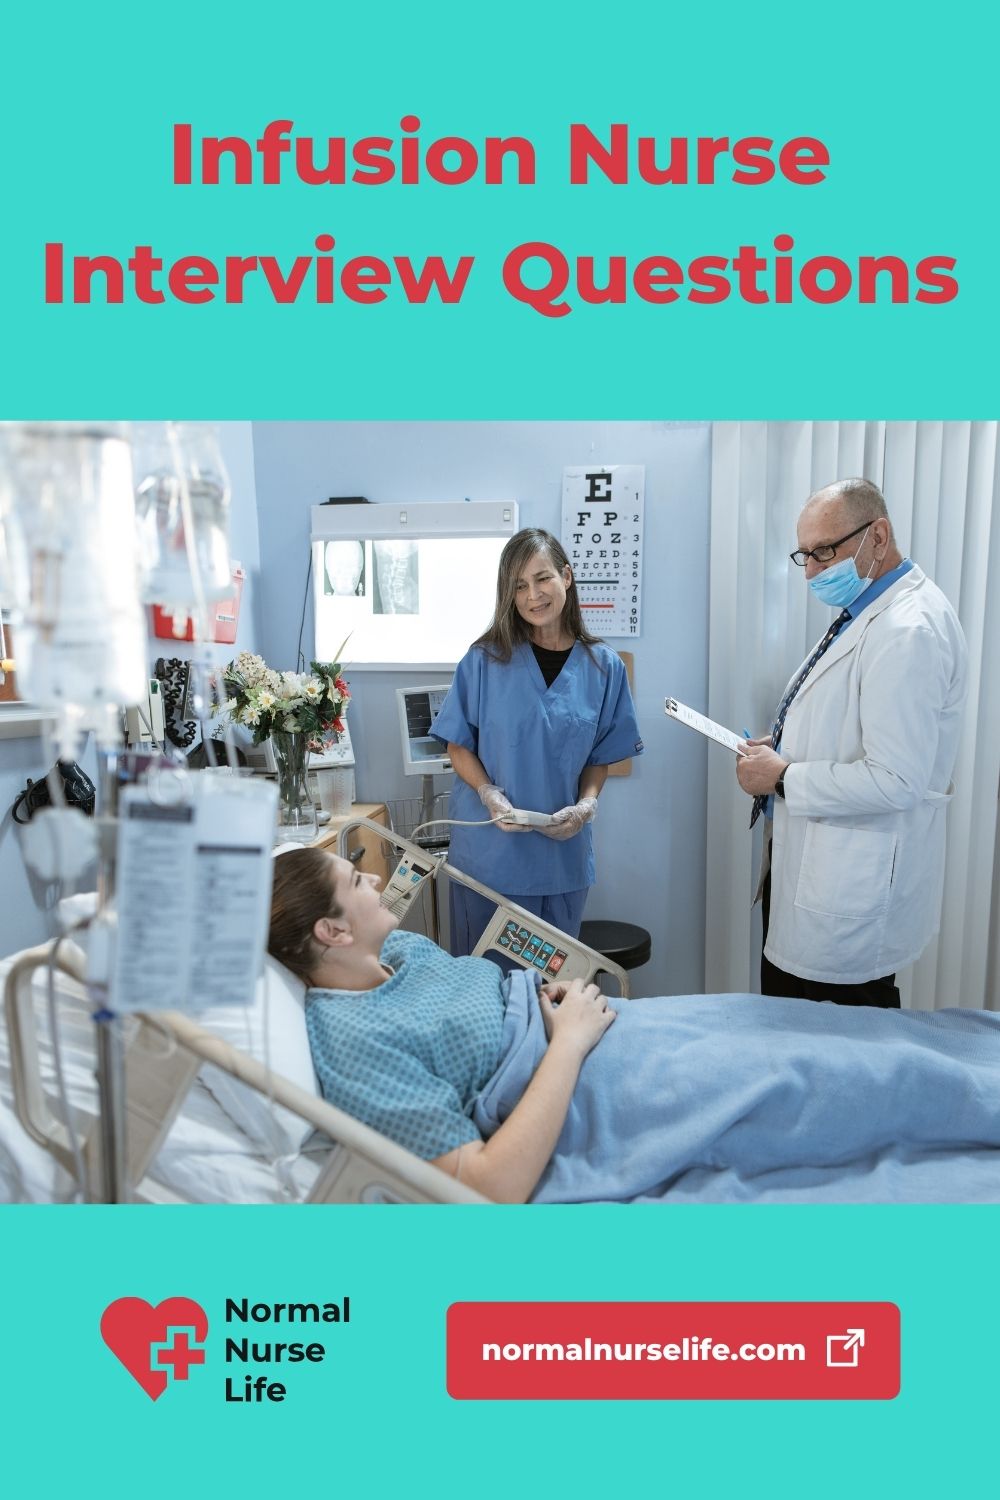 Infusion nurse interview questions and answers